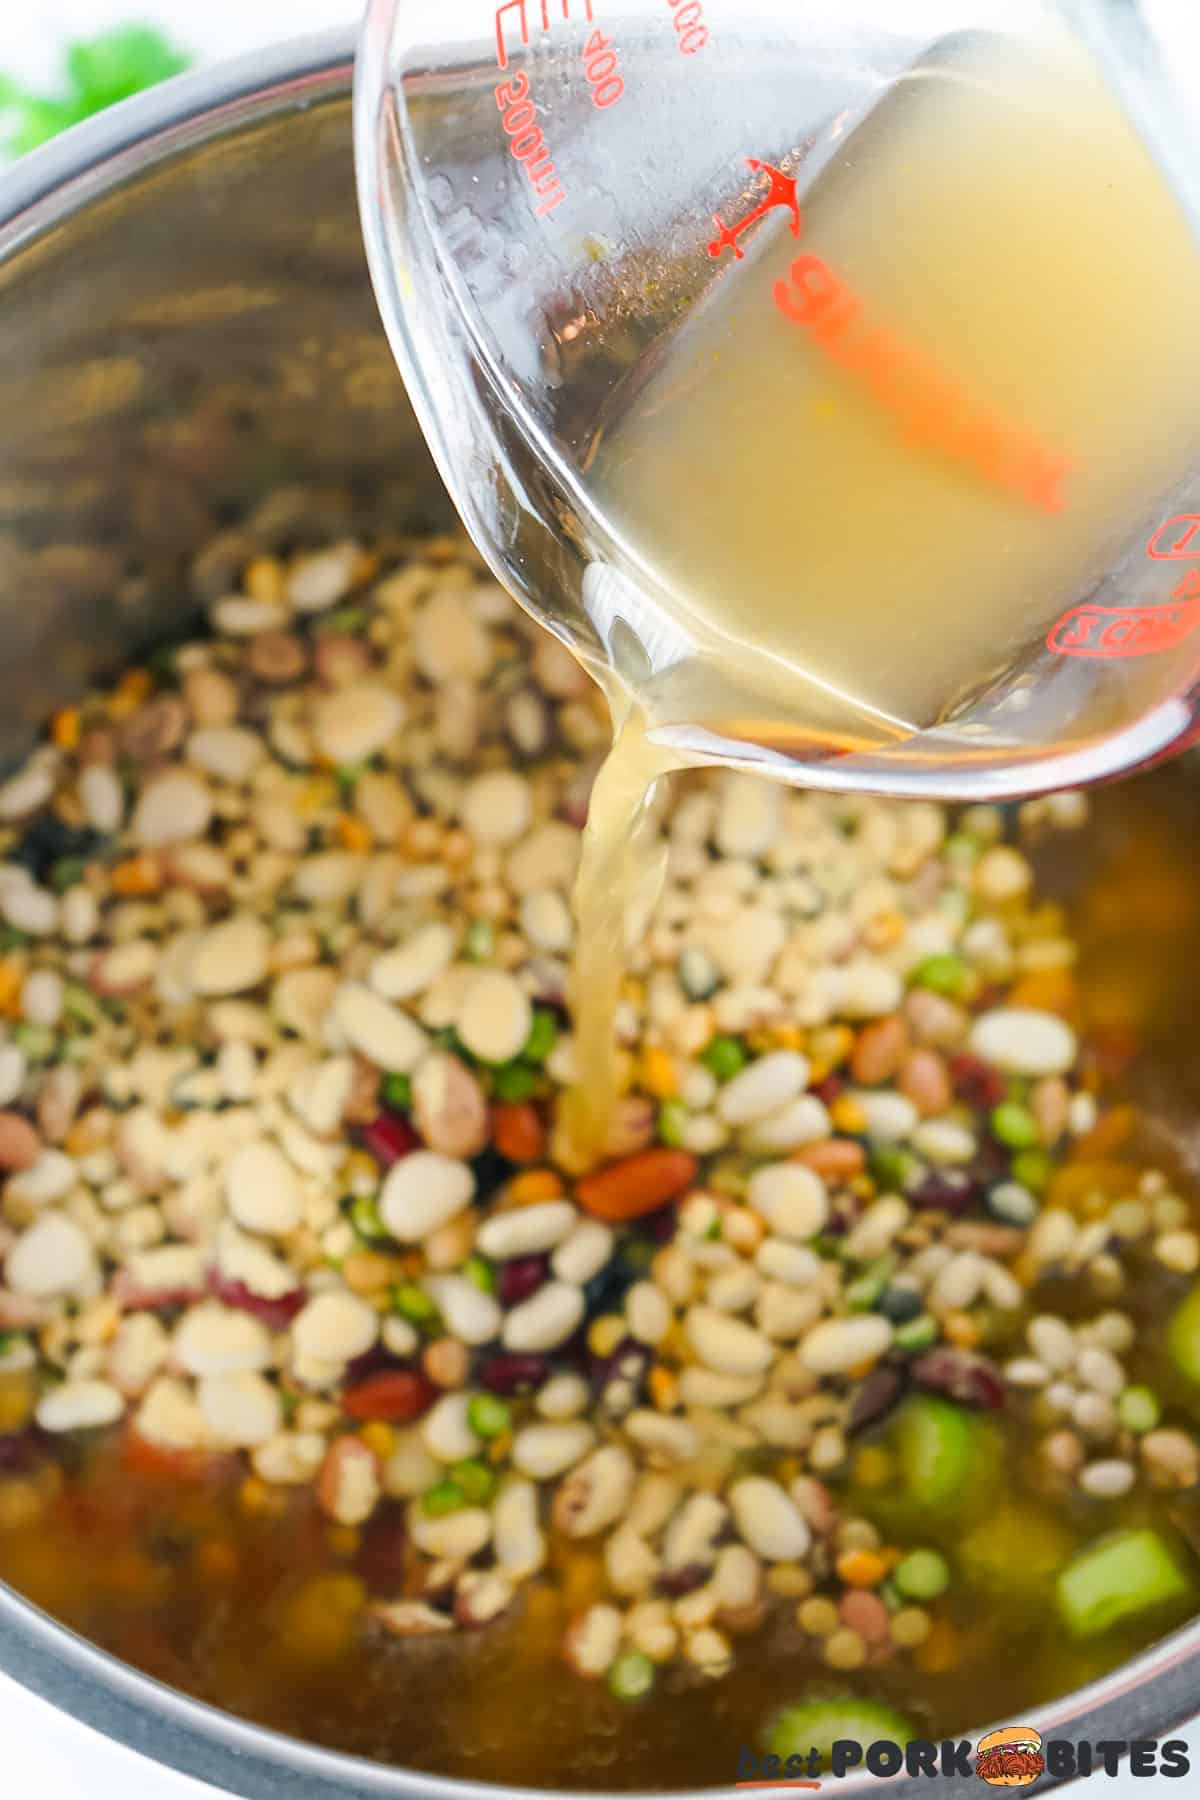 broth being poured into a pot of beans and vegetables